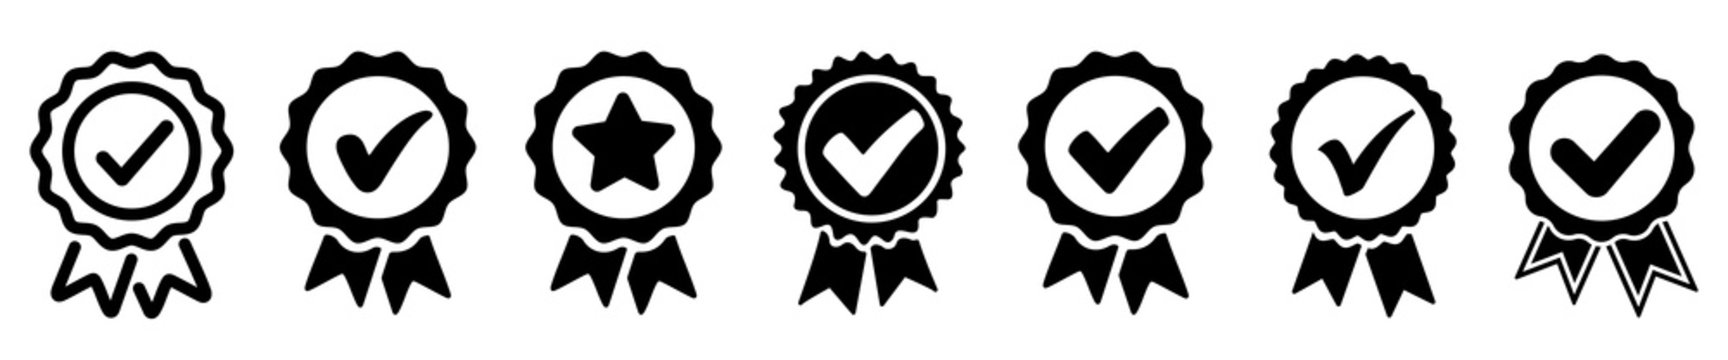 Set approval check icon isolated, approved or verified medal icon. certified badge symbol, quality sign – stock vector